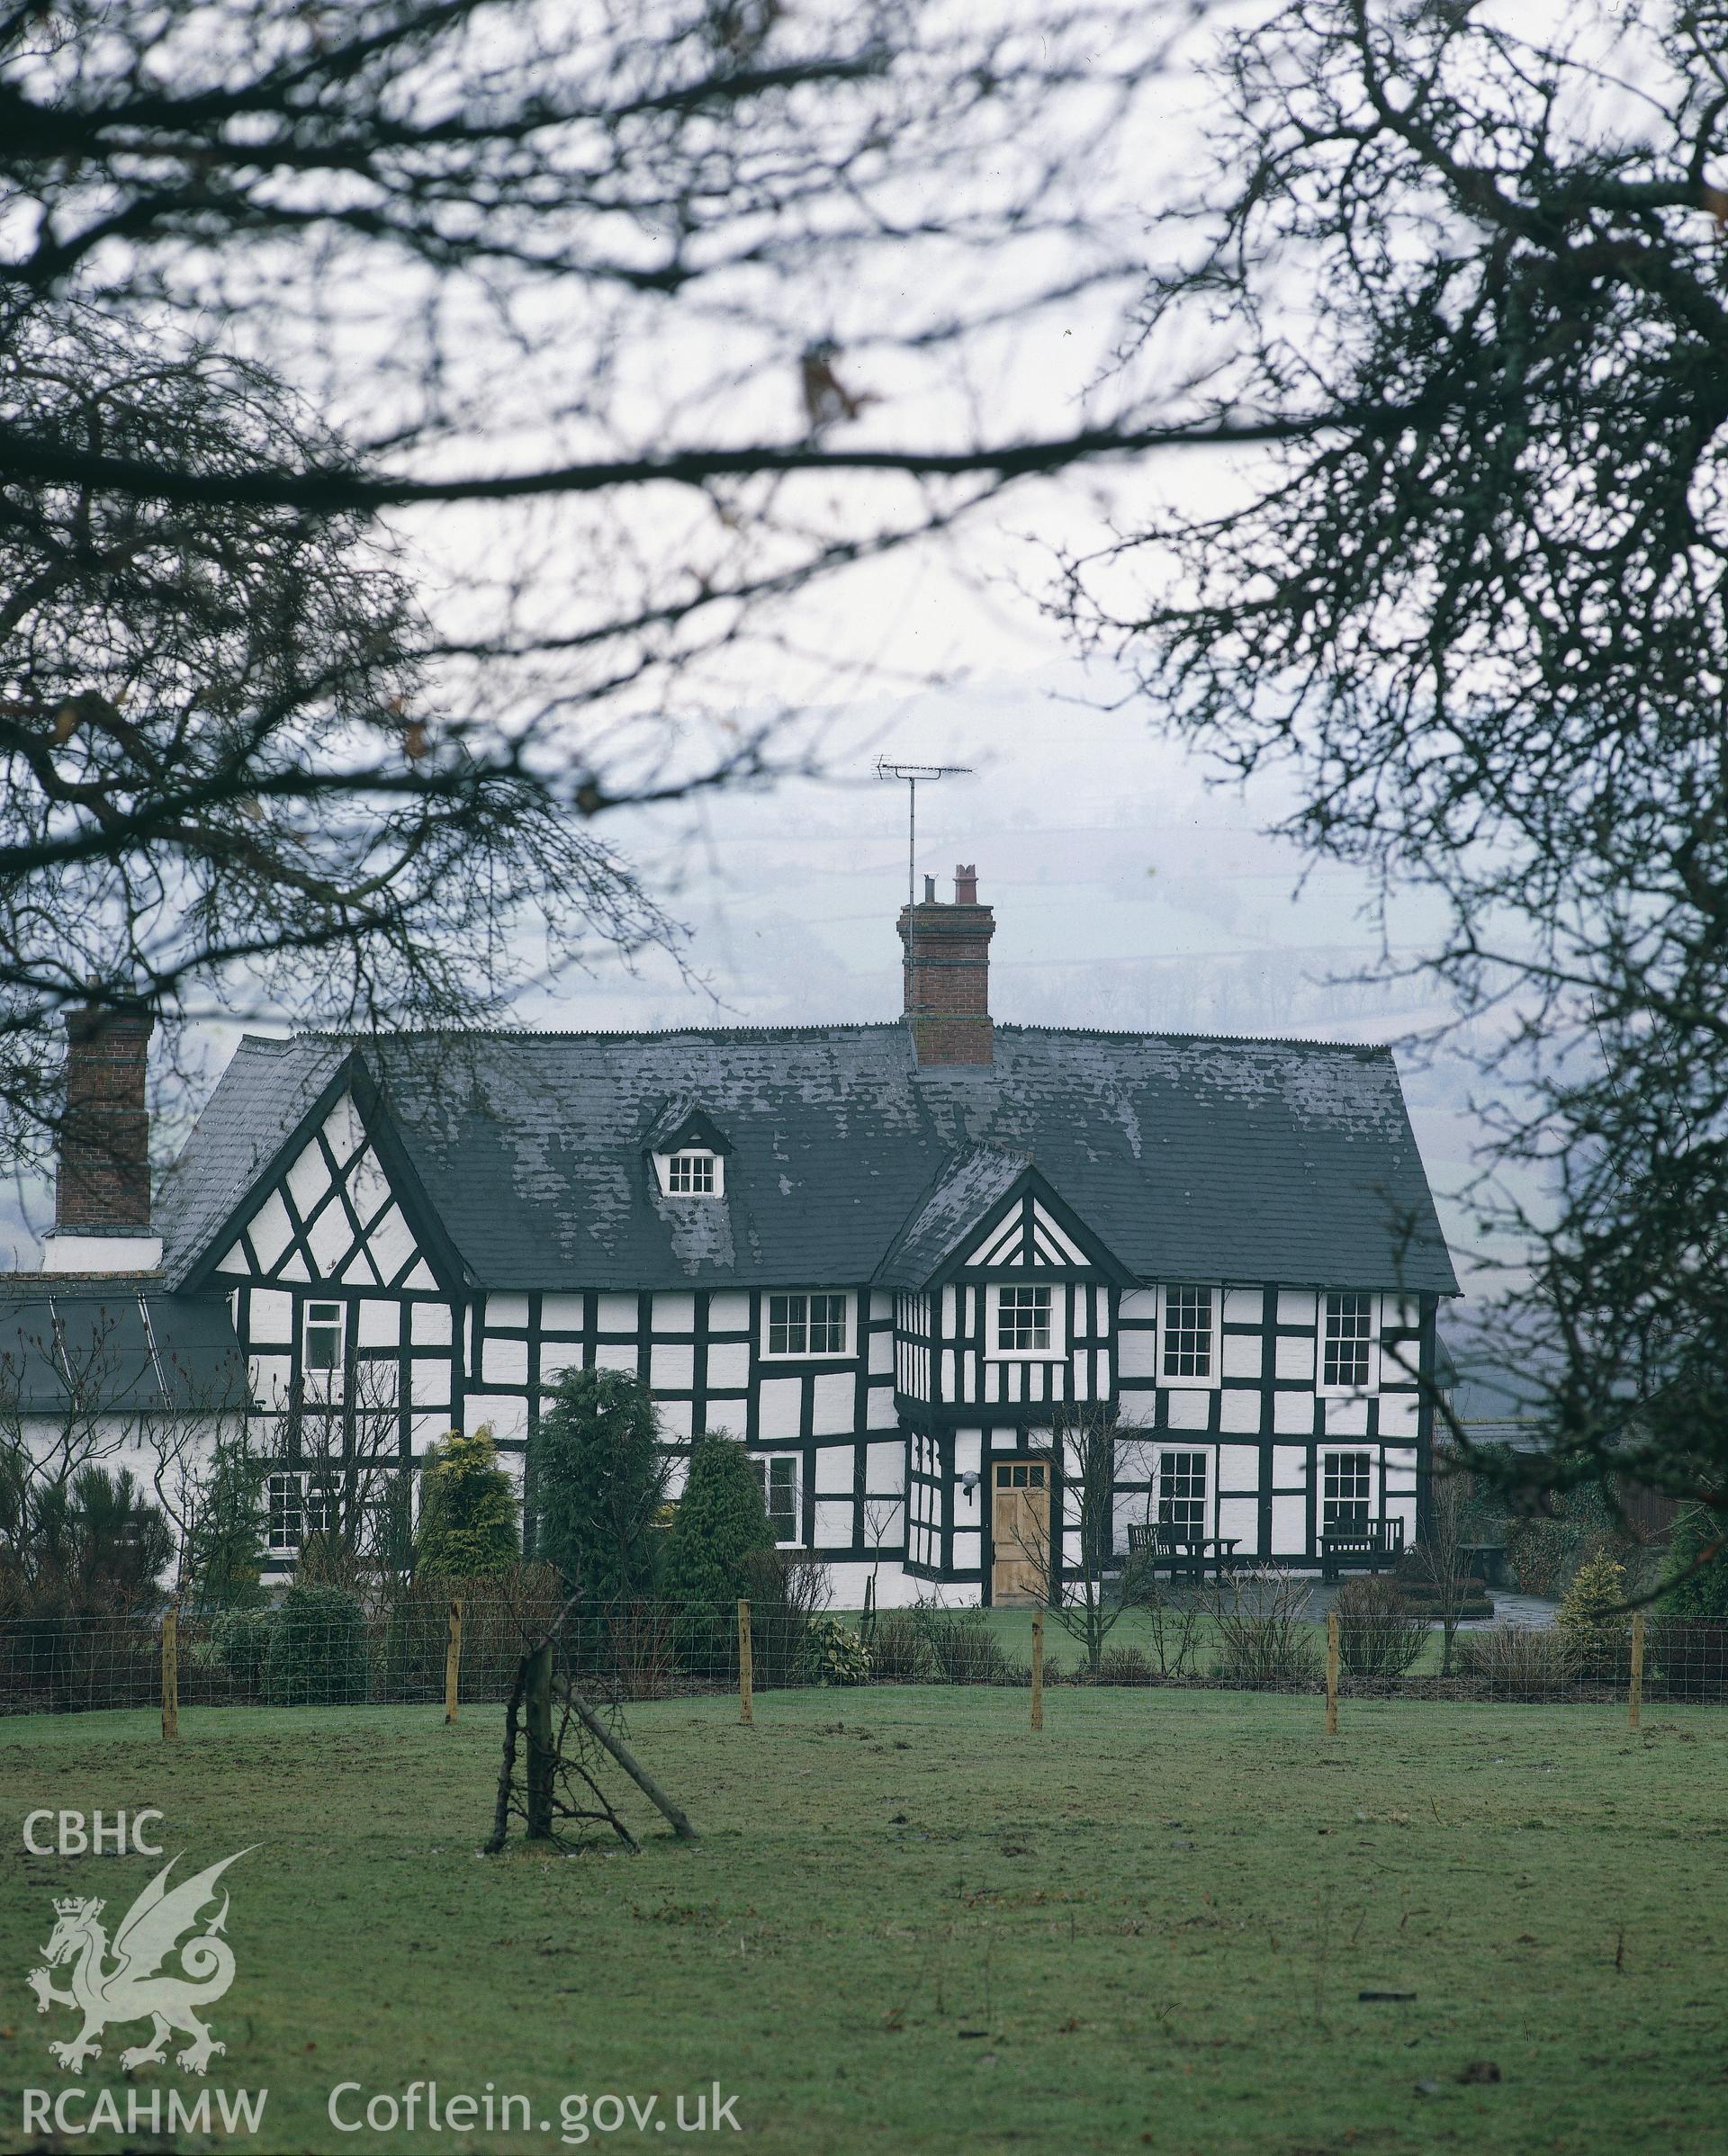 RCAHMW colour transparency showing Aston Hall.